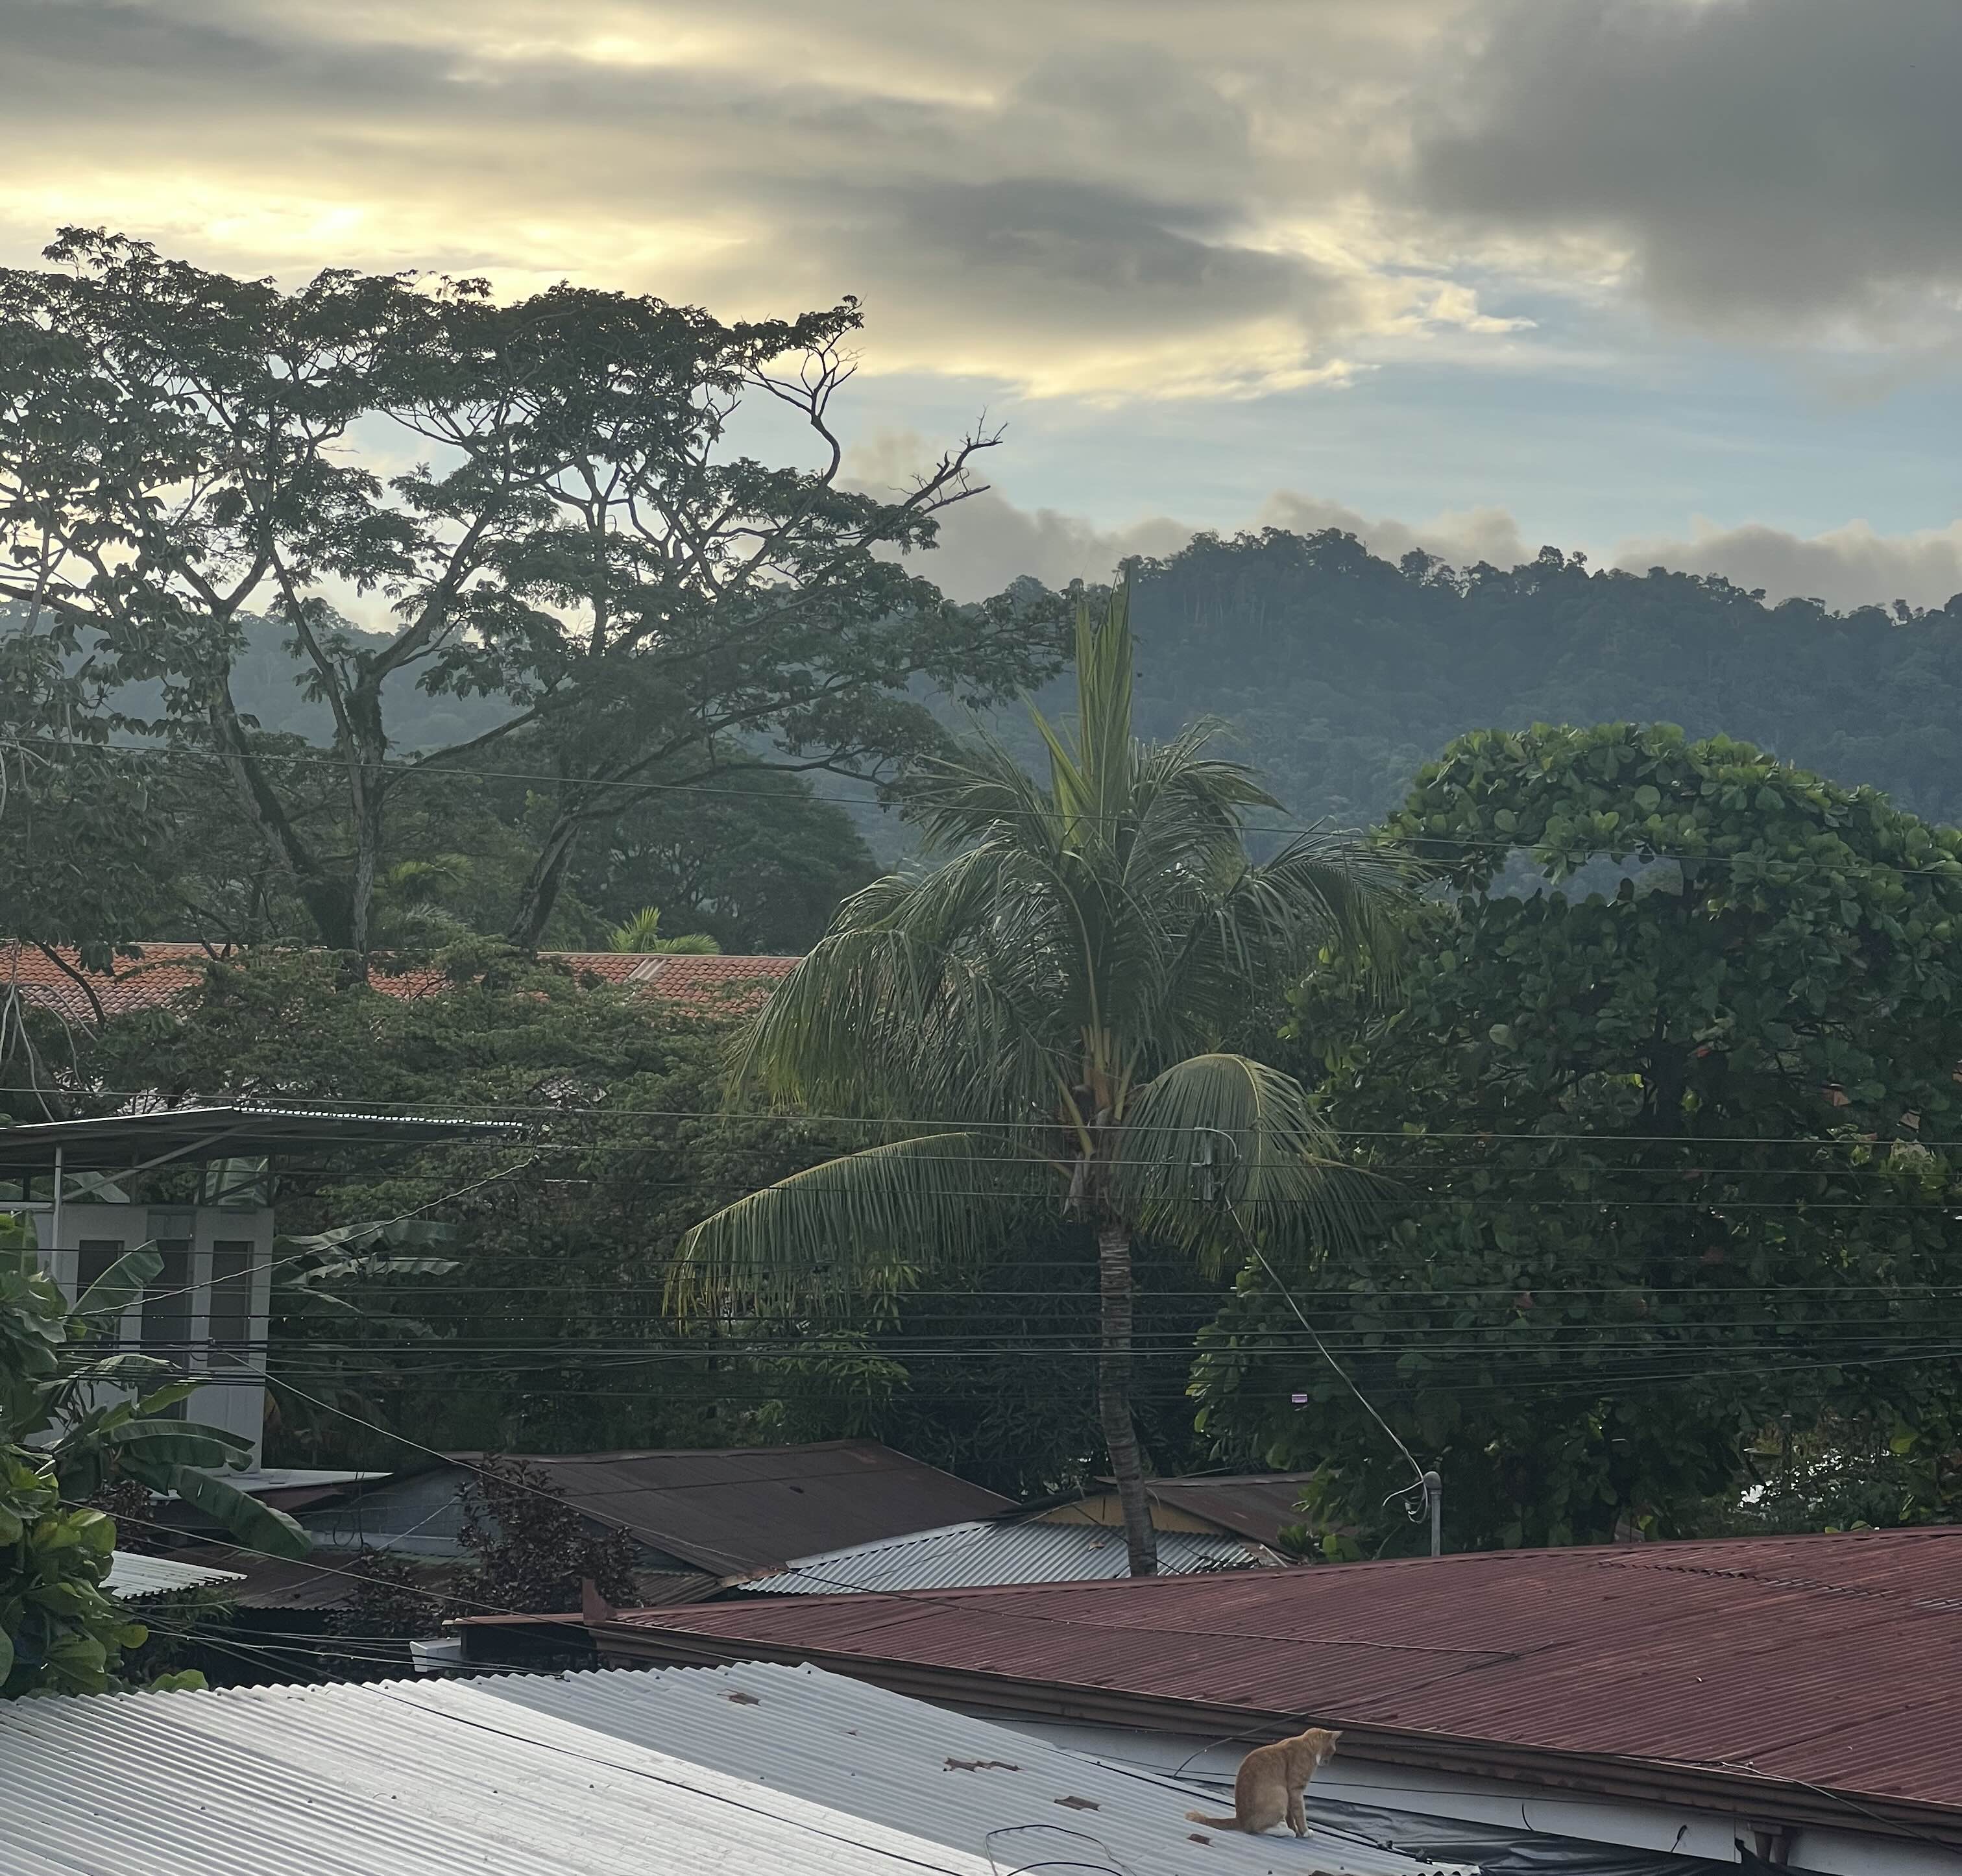 View from an Airbnb window showing a contrast of urban and natural landscapes: foreground with metal rooftops and electrical cables, and a backdrop of lush green tropical rainforest under a cloudy sky